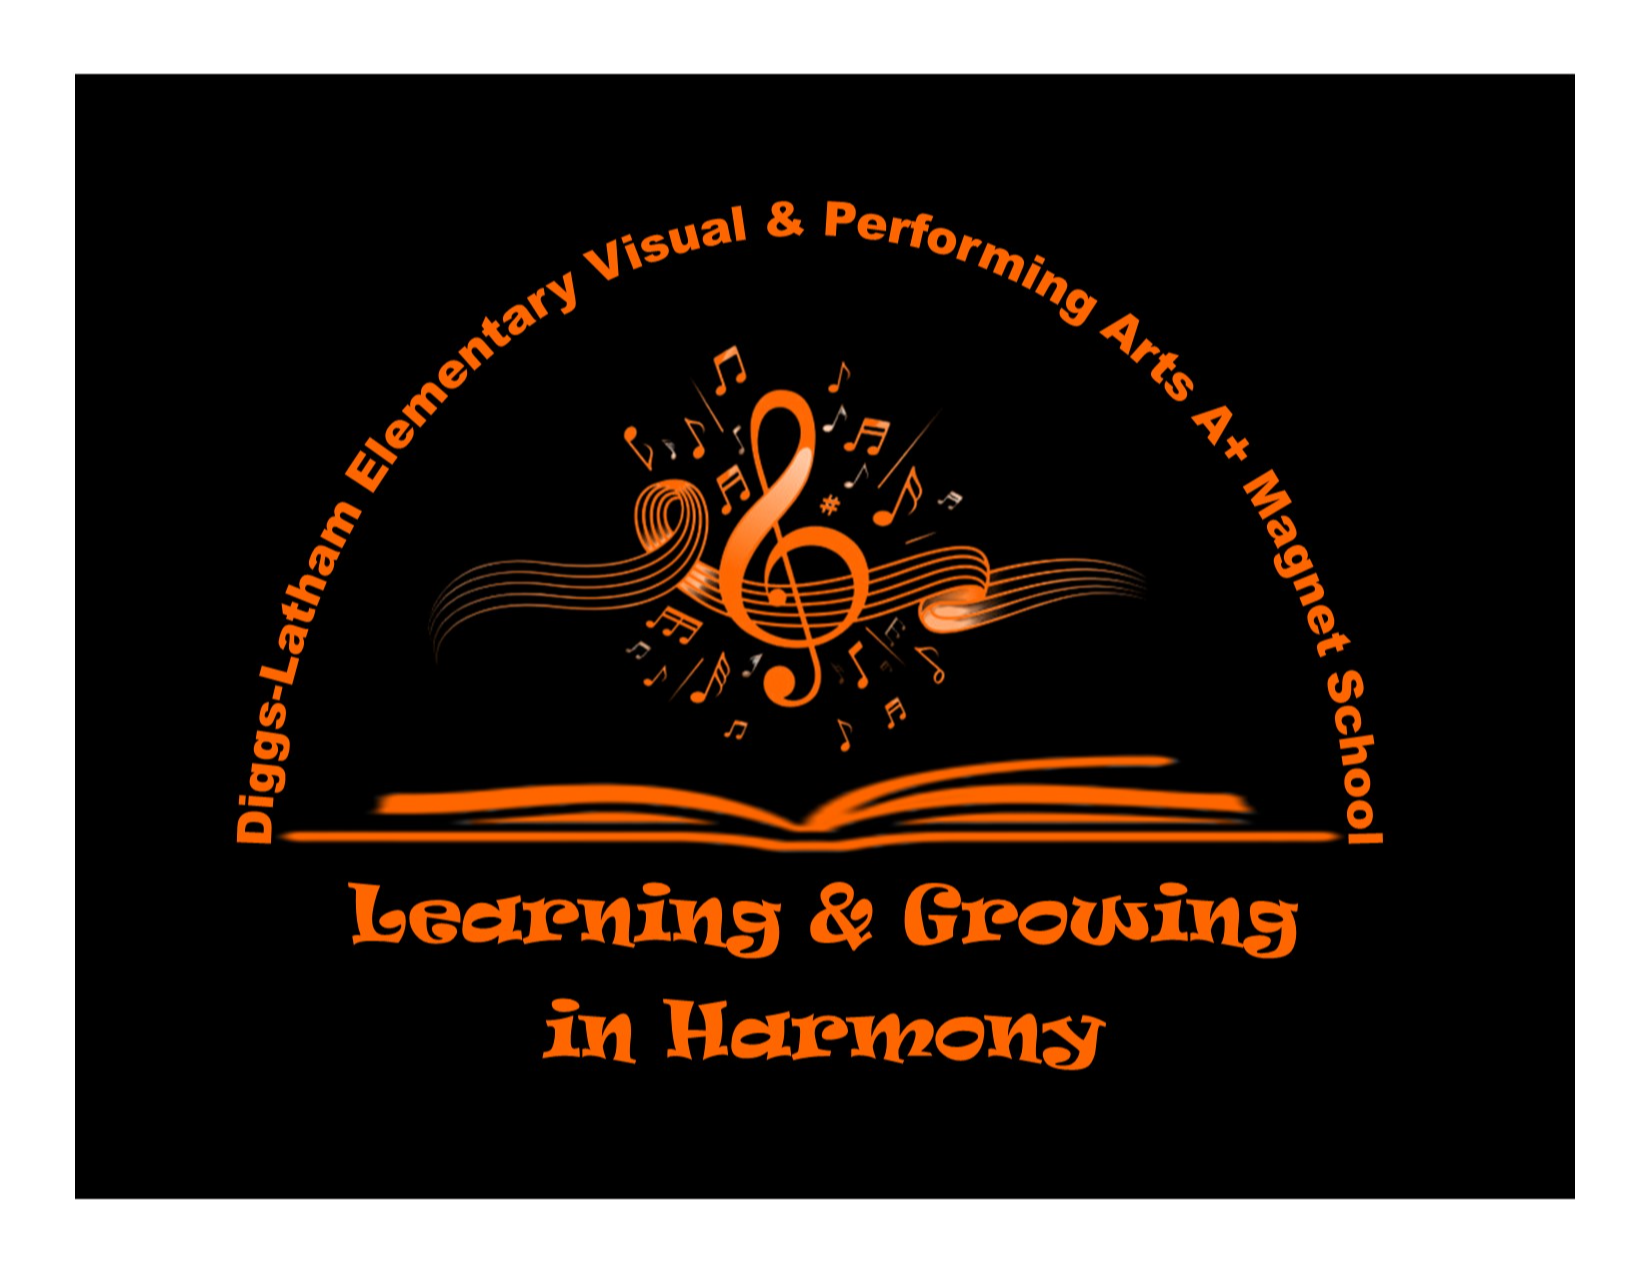 Learning & Growing in Harmony